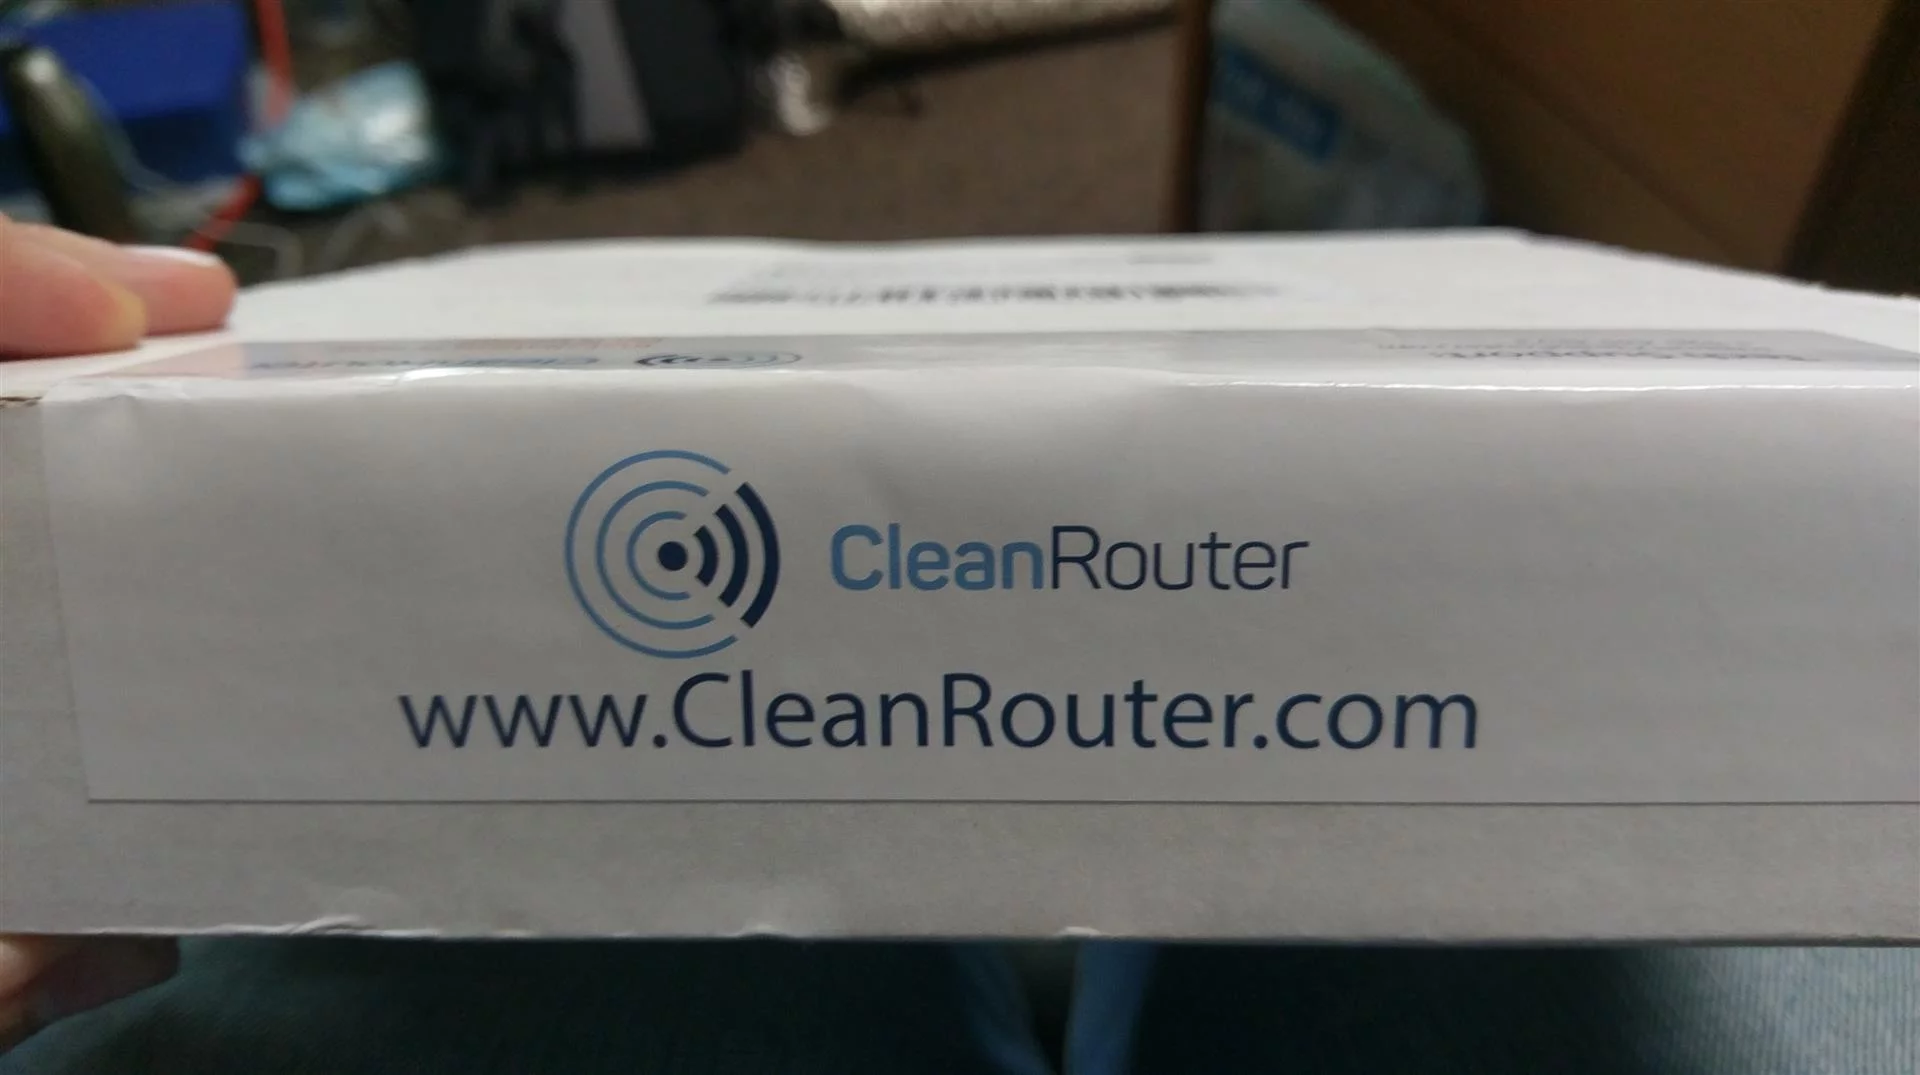 The Clean Router